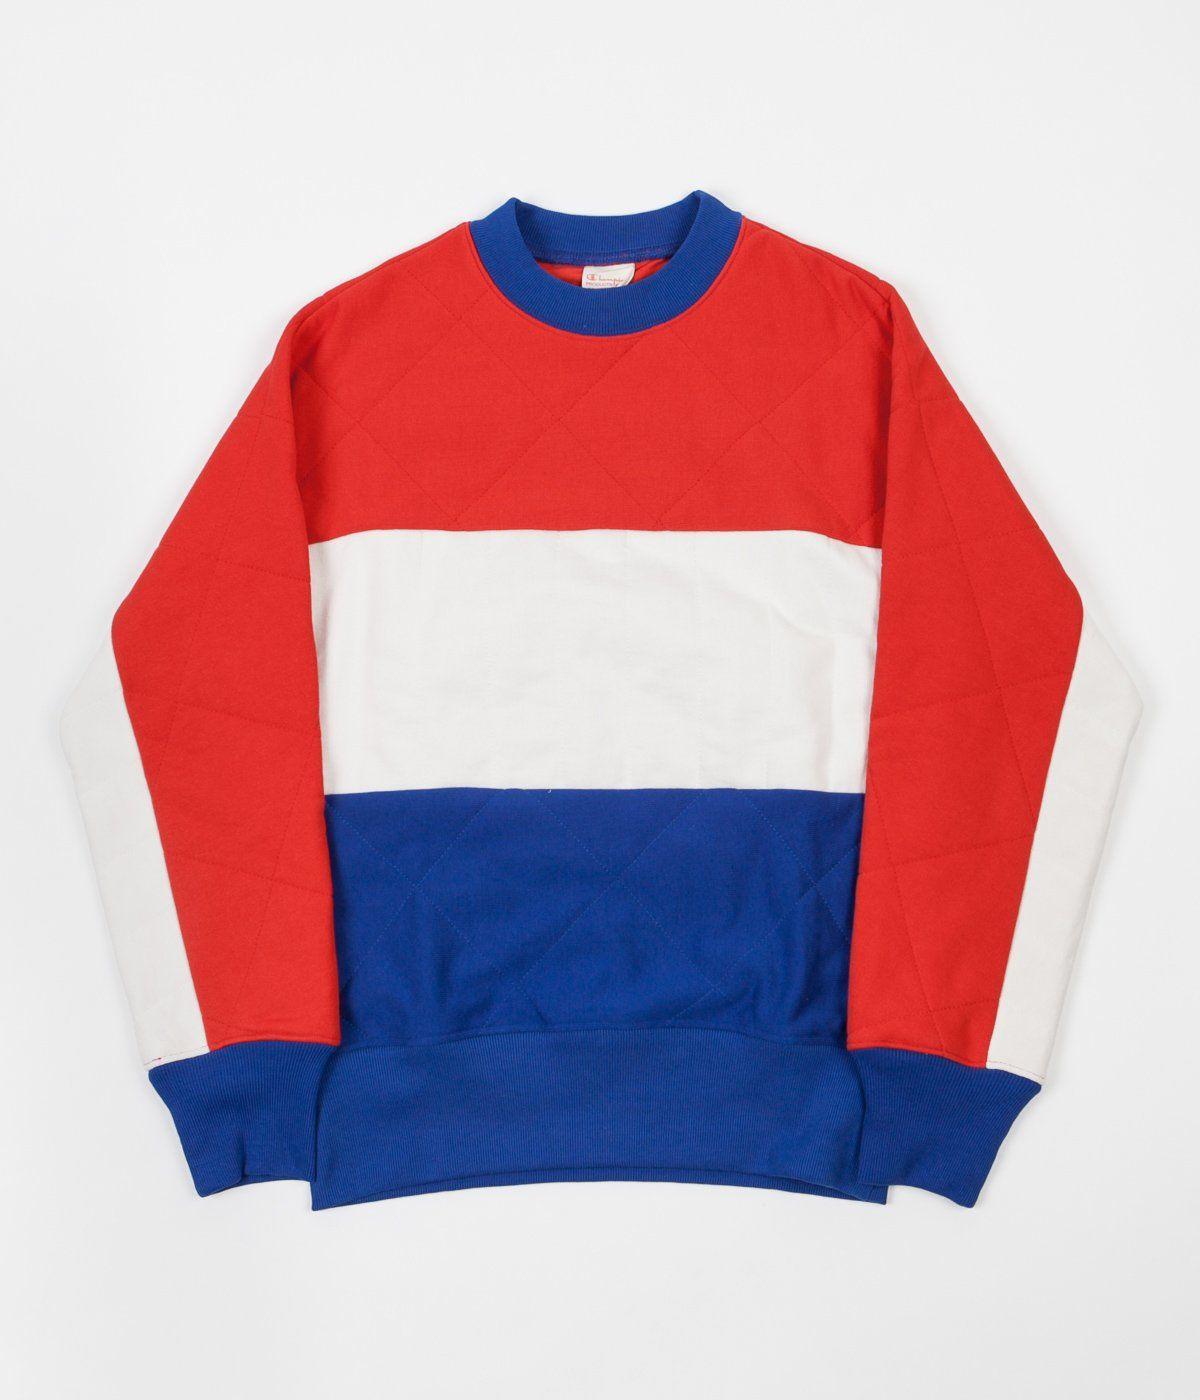 Red White and Blue Clothing Logo - Champion Quilted Ski Crewneck Sweatshirt - Red / White / Blue | Flatspot